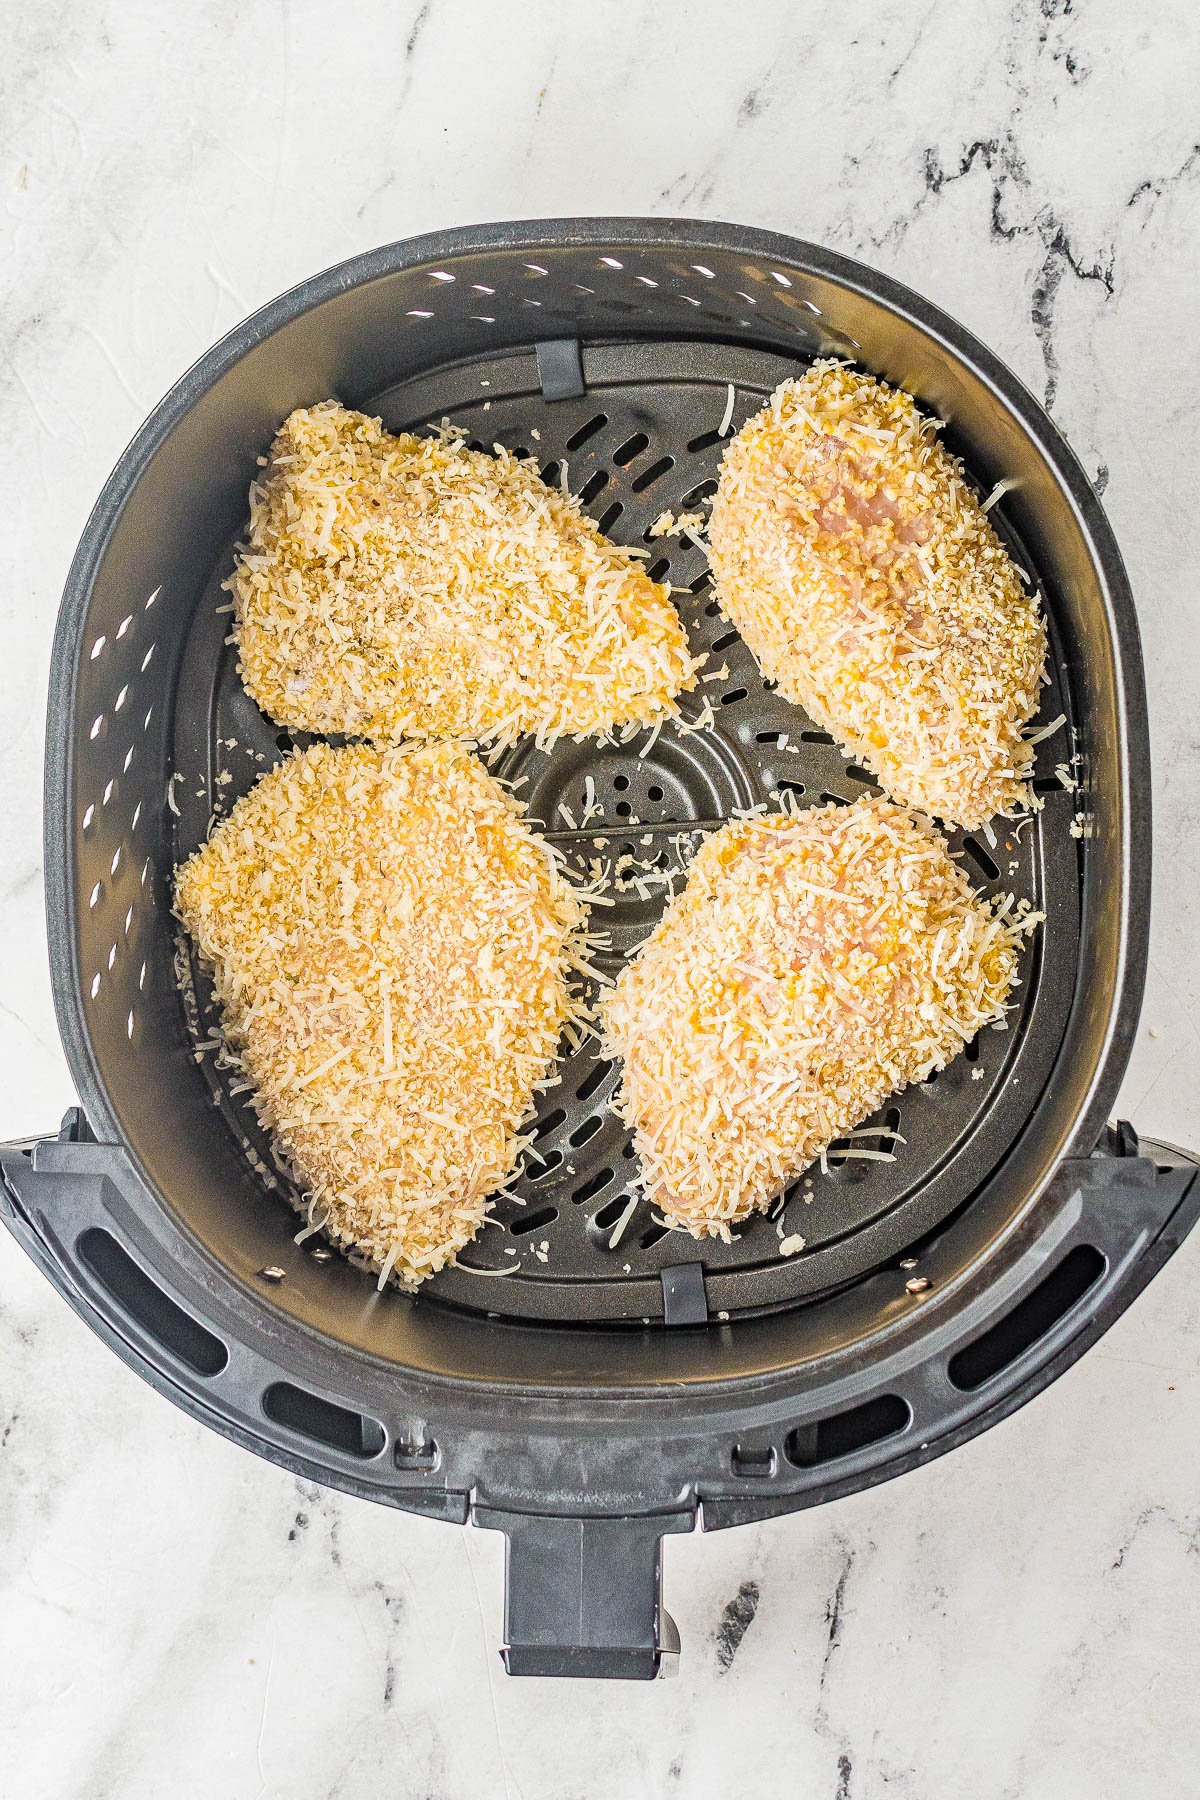 Air Fryer Parmesan Chicken - Coated in a mixture of panko bread crumbs and Parmesan cheese, this "fried" chicken is perfectly crispy on the outside and juicy, tender, and moist inside! It's EASY, ready in 15 minutes, perfect for busy weeknights, and a healthier way to indulge in fried chicken! Oven-baking instructions also provided.